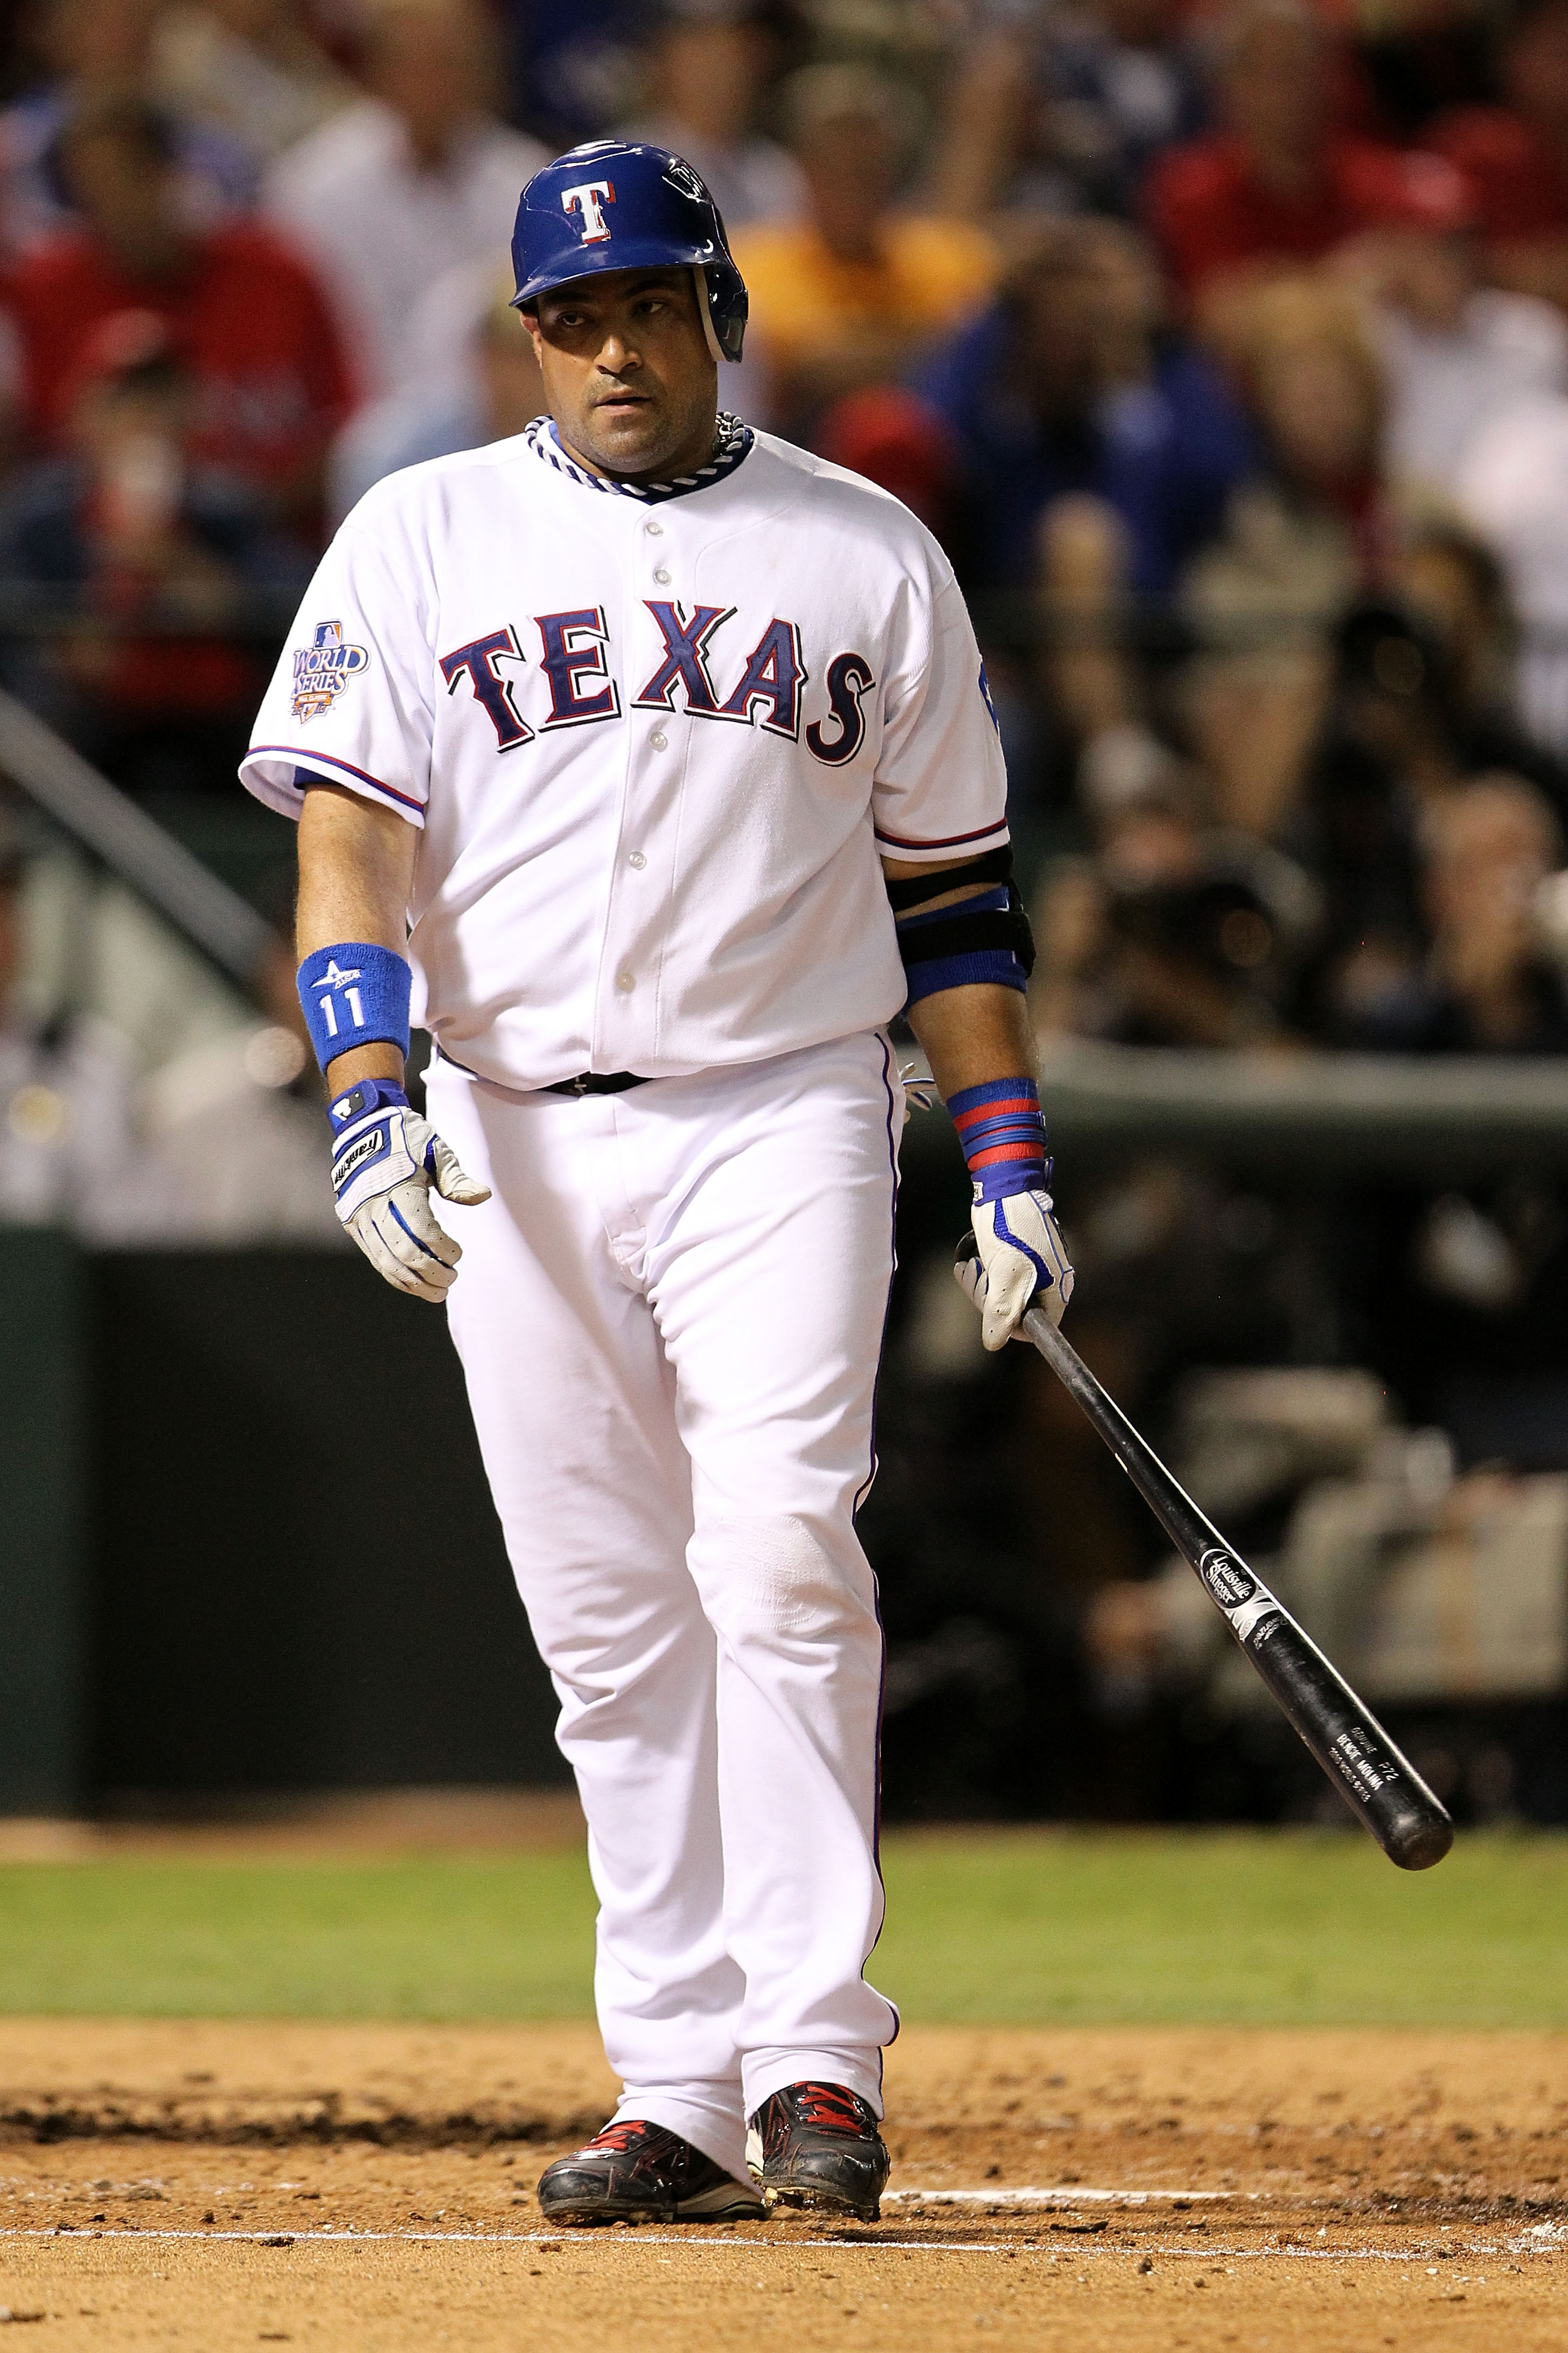 ARLINGTON, TX - NOVEMBER 01:  Bengie Molina #11 of the Texas Rangers reacts after he struck out against the San Francisco Giants in Game Five of the 2010 MLB World Series at Rangers Ballpark in Arlington on November 1, 2010 in Arlington, Texas. The Giants